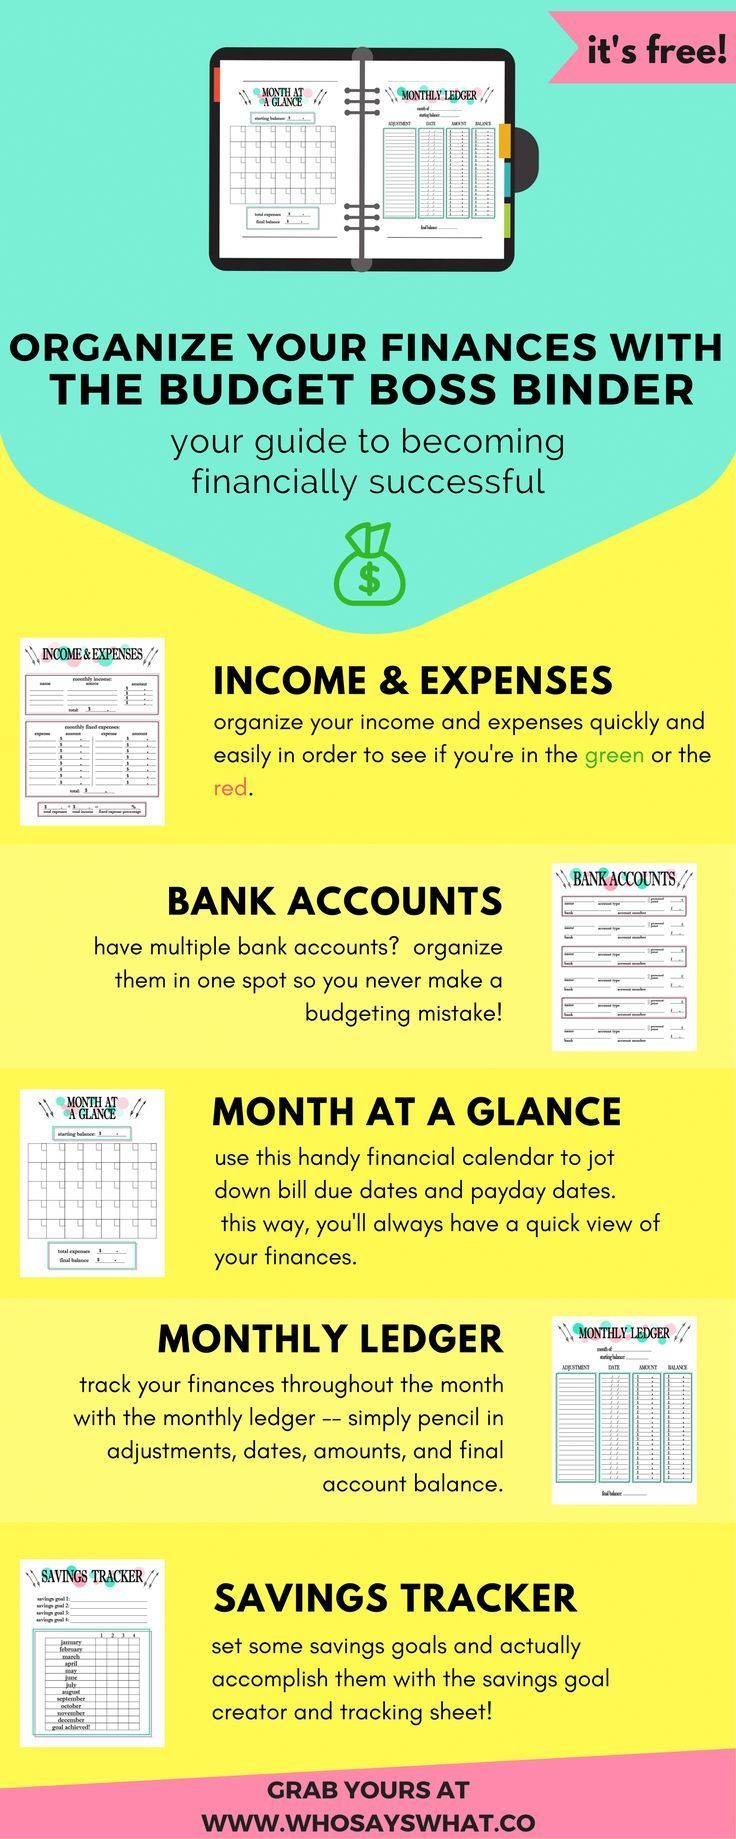 Free Budget Binder: The Easiest Way To Become A Budget Boss | Money - Free Printable Budget Binder Worksheets